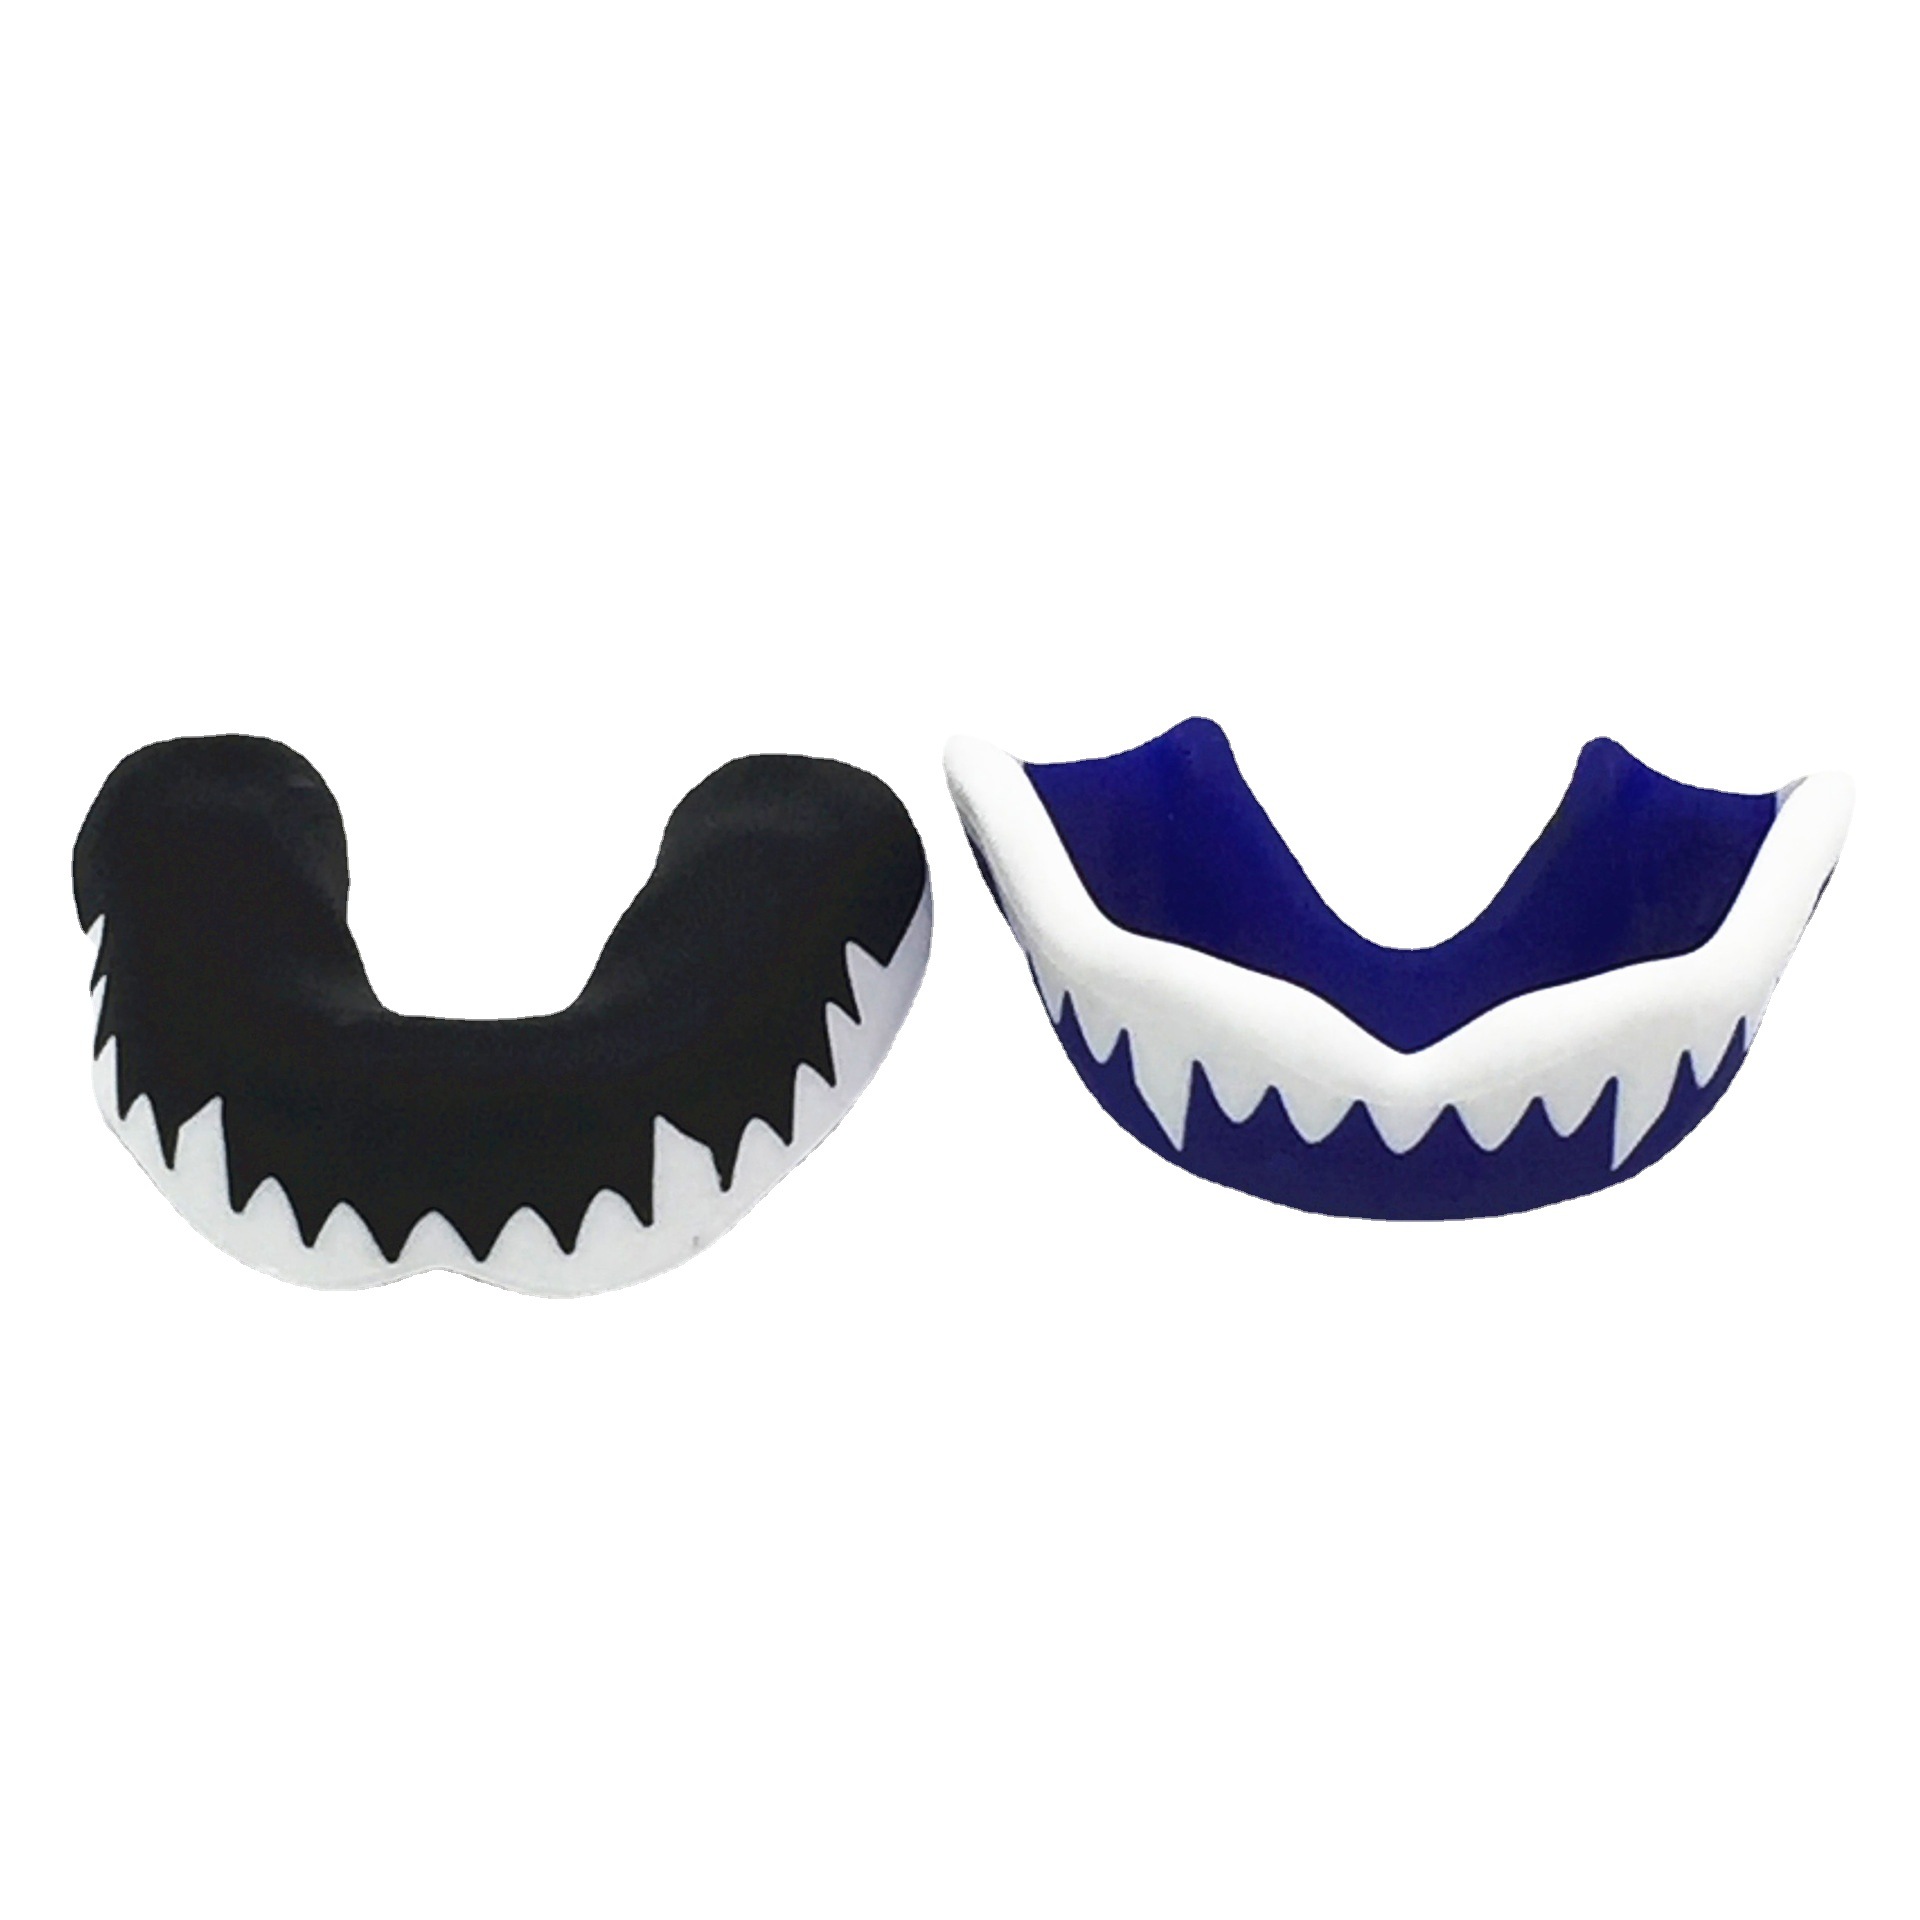  Under Armour Sport Mouth Guard Sports for Football, Lacrosse,  Basketball, Hockey, Boxing, MMA, Jiu Jitsu, Includes Detachable Helmet  Strap, Youth & Adult. Protectar Bucal, Black : Sports & Outdoors